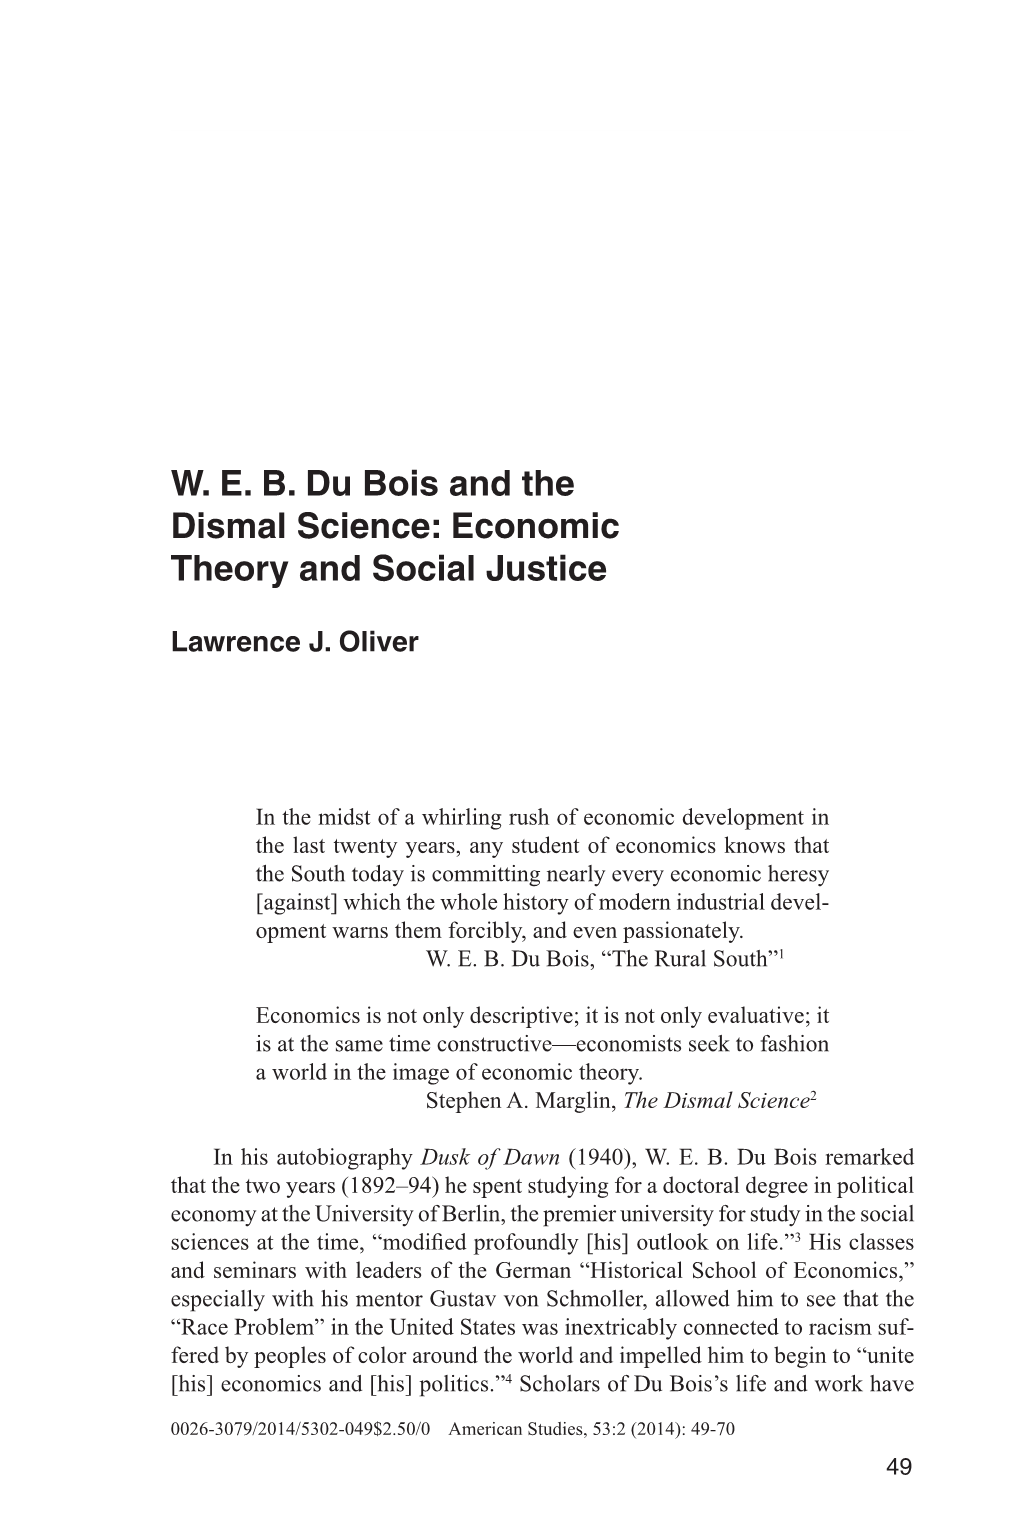 WEB Du Bois and the Dismal Science